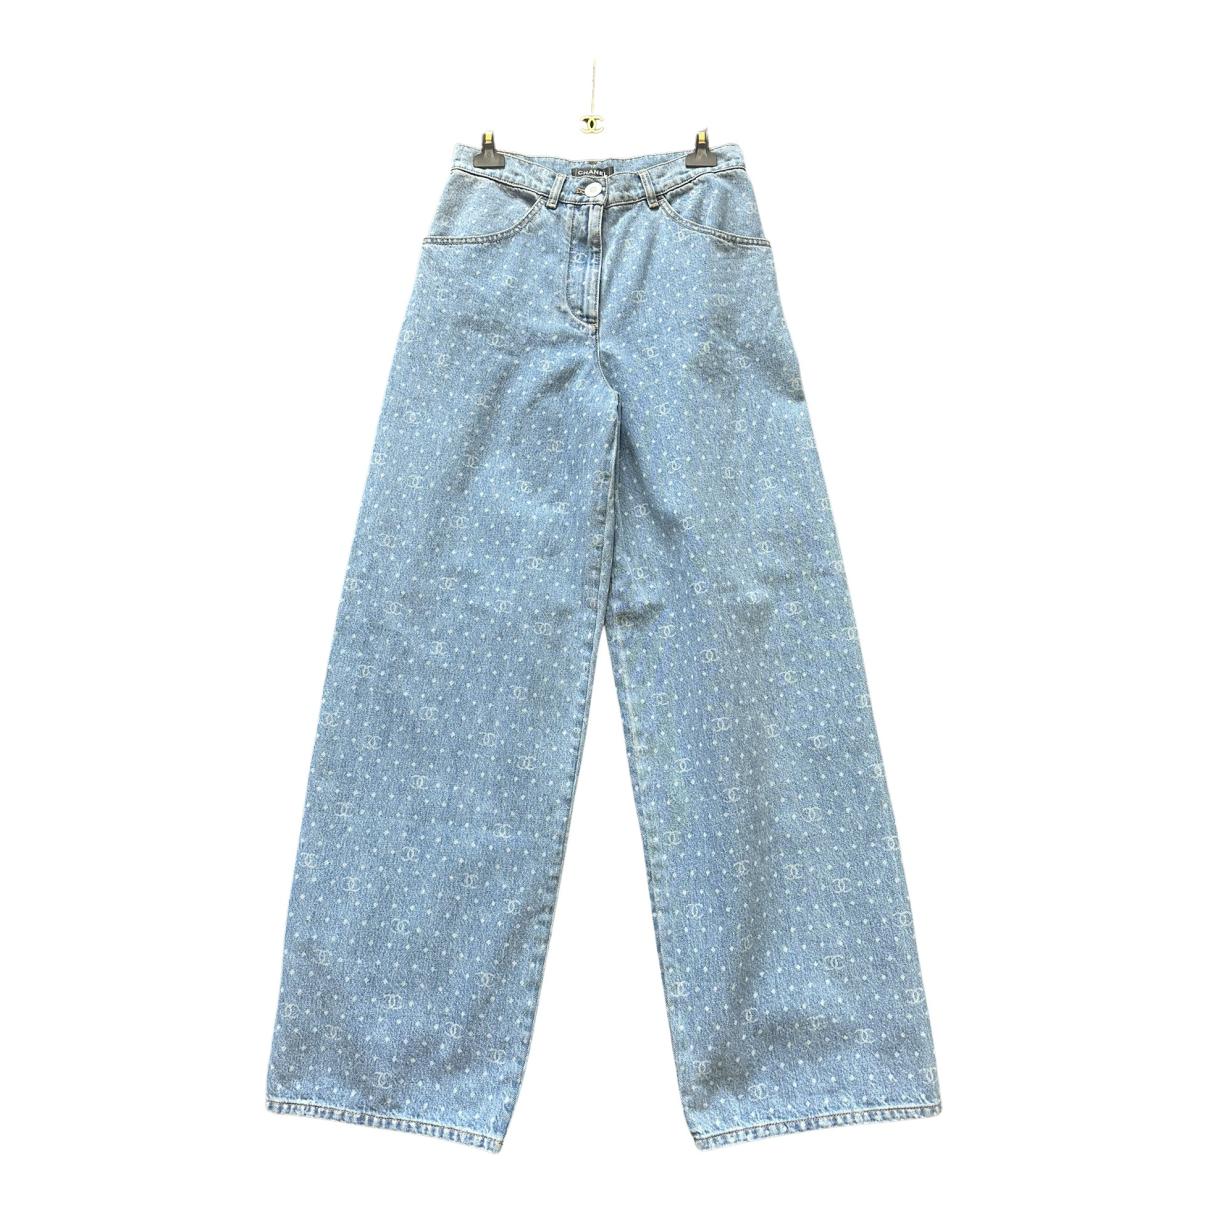 CHANEL CHANEL Denim pants cotton Blue Used Women size 36 ｜Product  Code：2104102193986｜BRAND OFF Online Store